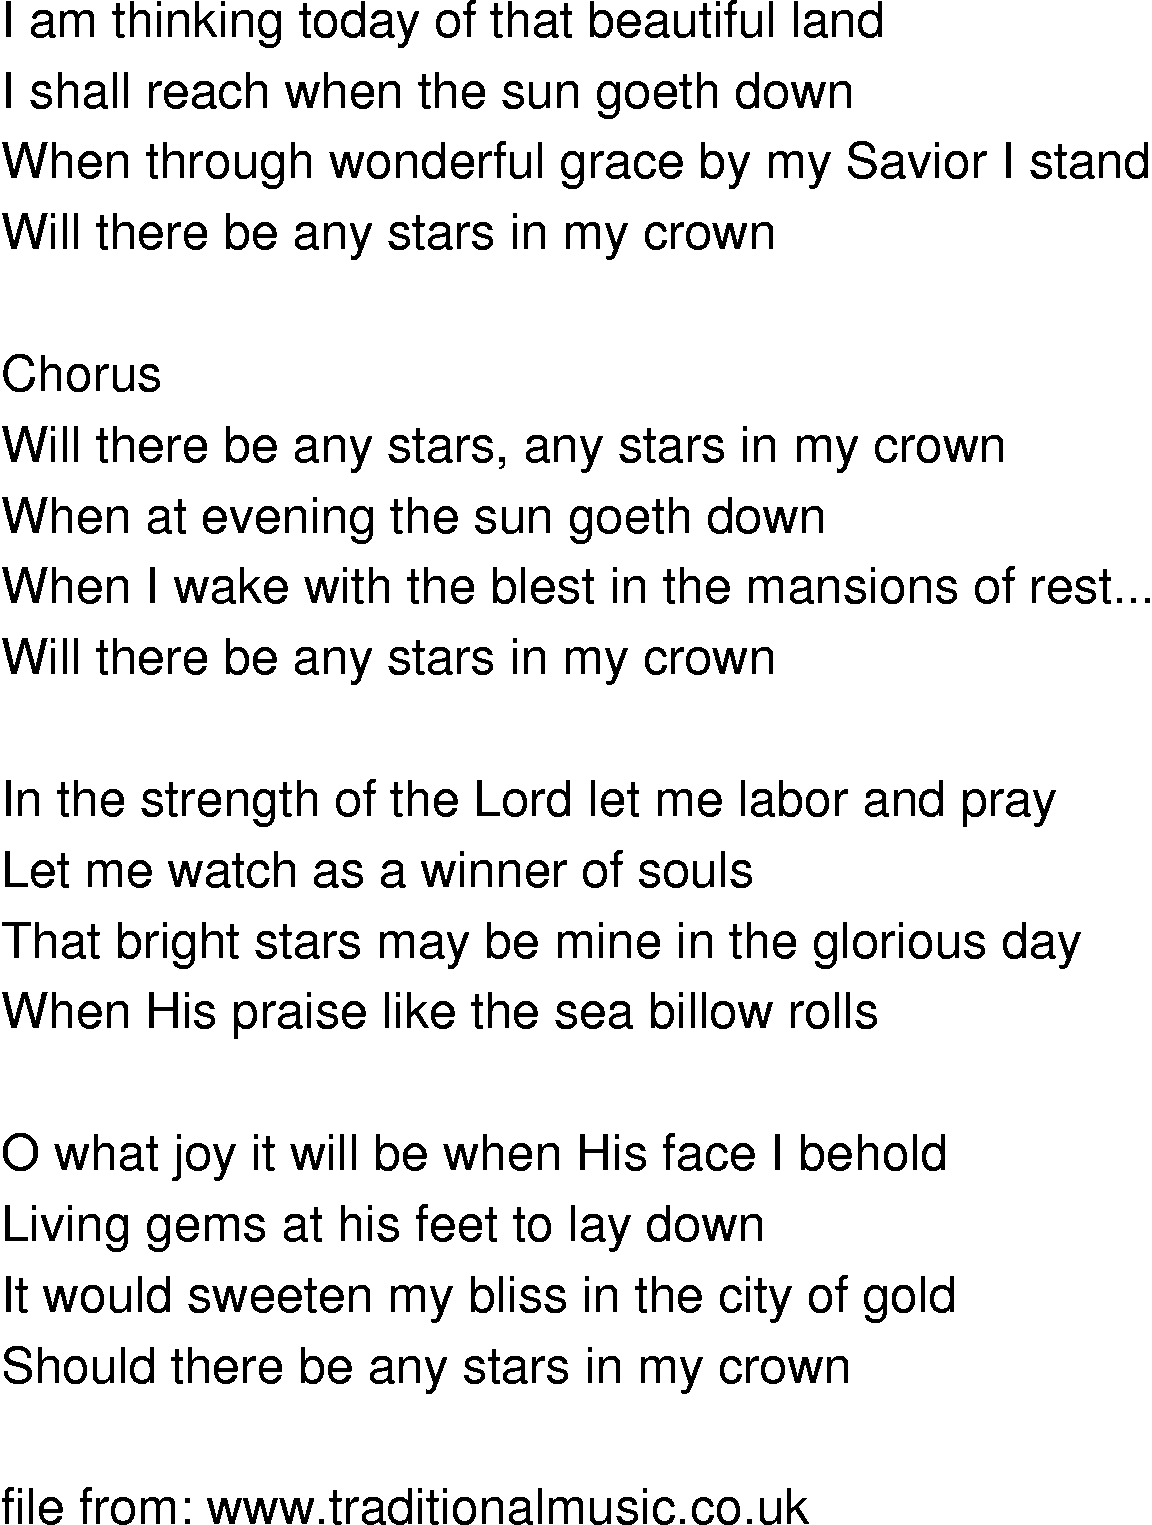 Old-Time (oldtimey) Song Lyrics - will there be any stars in my crown